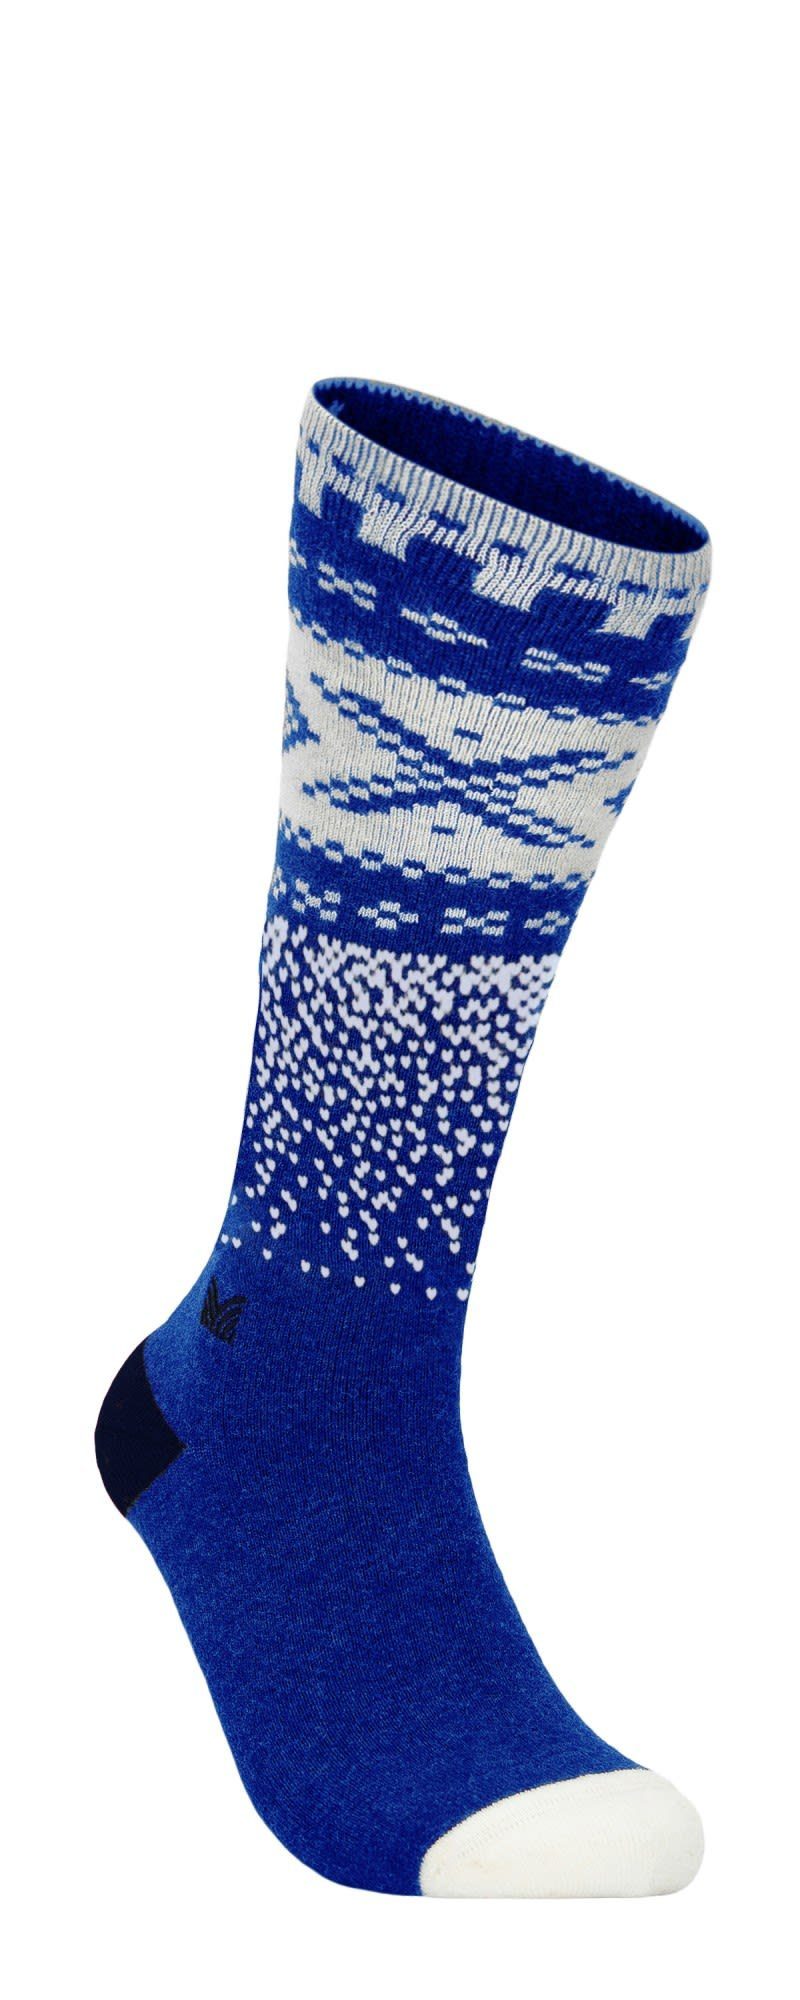 Dale of High - Navy Socks Of Dale Ultramarine - Offwhite Norway Thermosocken Norway Cortina